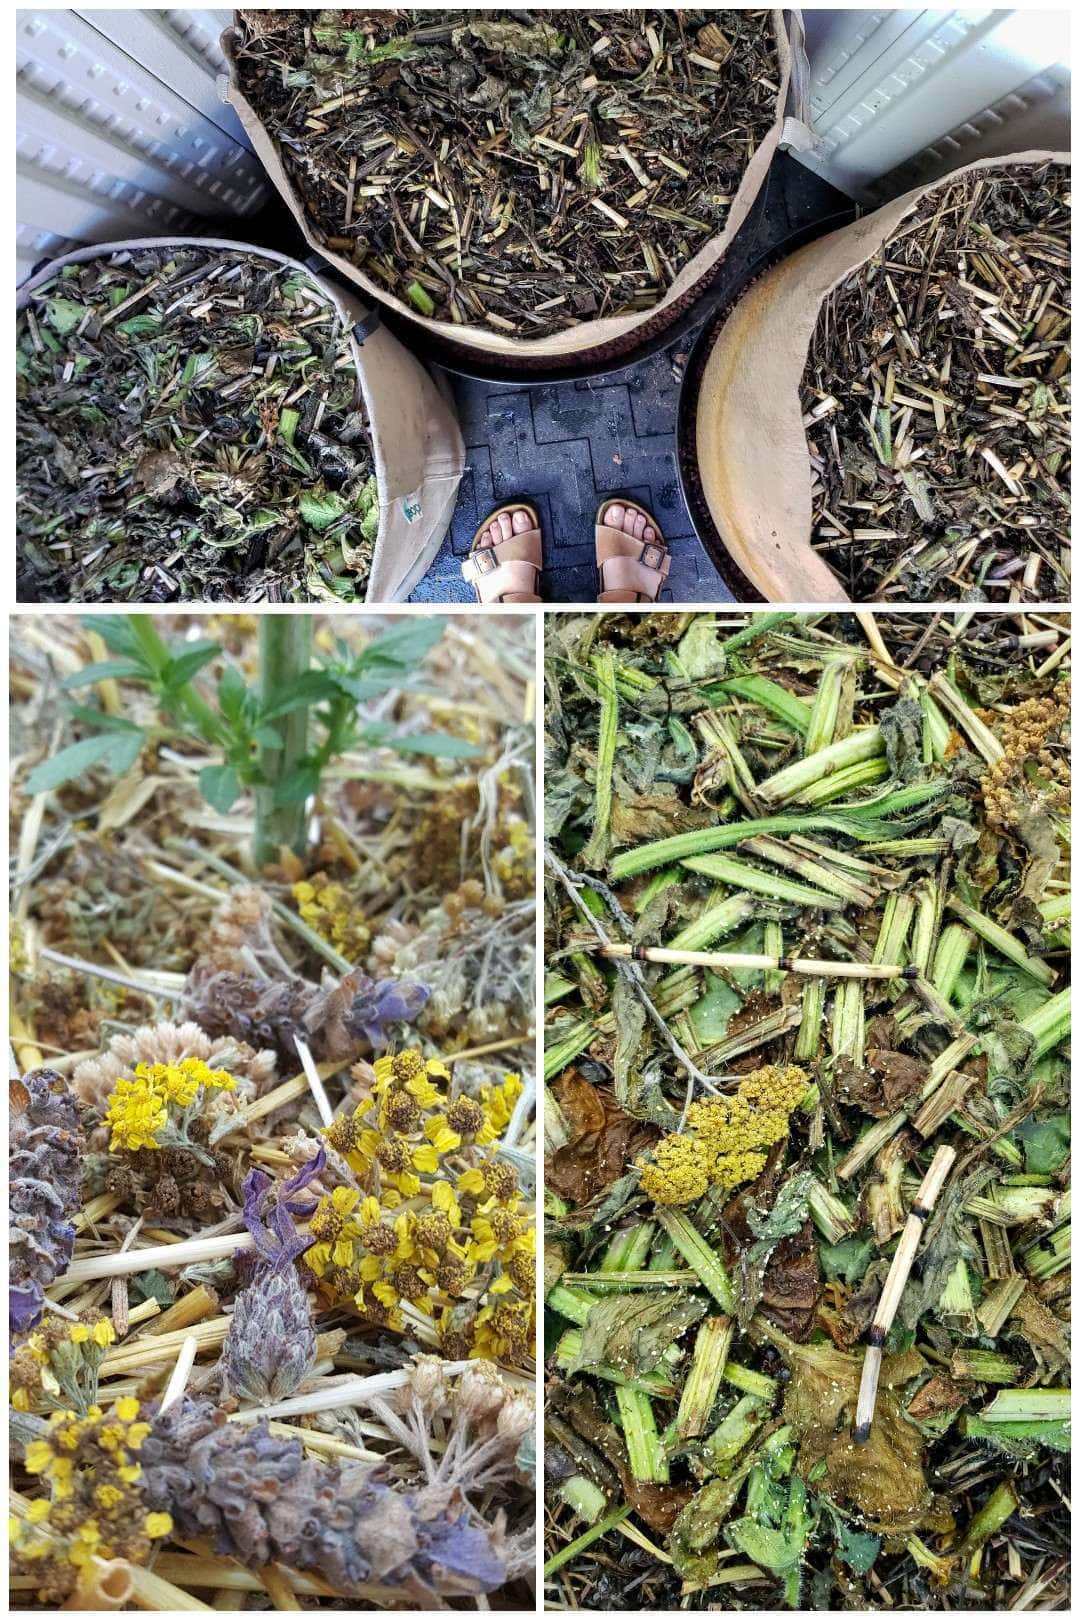 A three way image collage, the first image shows two feet standing amongst three 25 gallon fabric grow bags. Each one is heavily mulched with dynamic accumulator plants. The second image shows a close up of some of the mulch, yarrow flowers, horsetail, and lavender flowers  are visible. The third image shows another close up image of the mulch, yarrow, fava beans, borage, and horsetail are visible amongst the decaying mulch material which will turn into rich organic matter in time. 